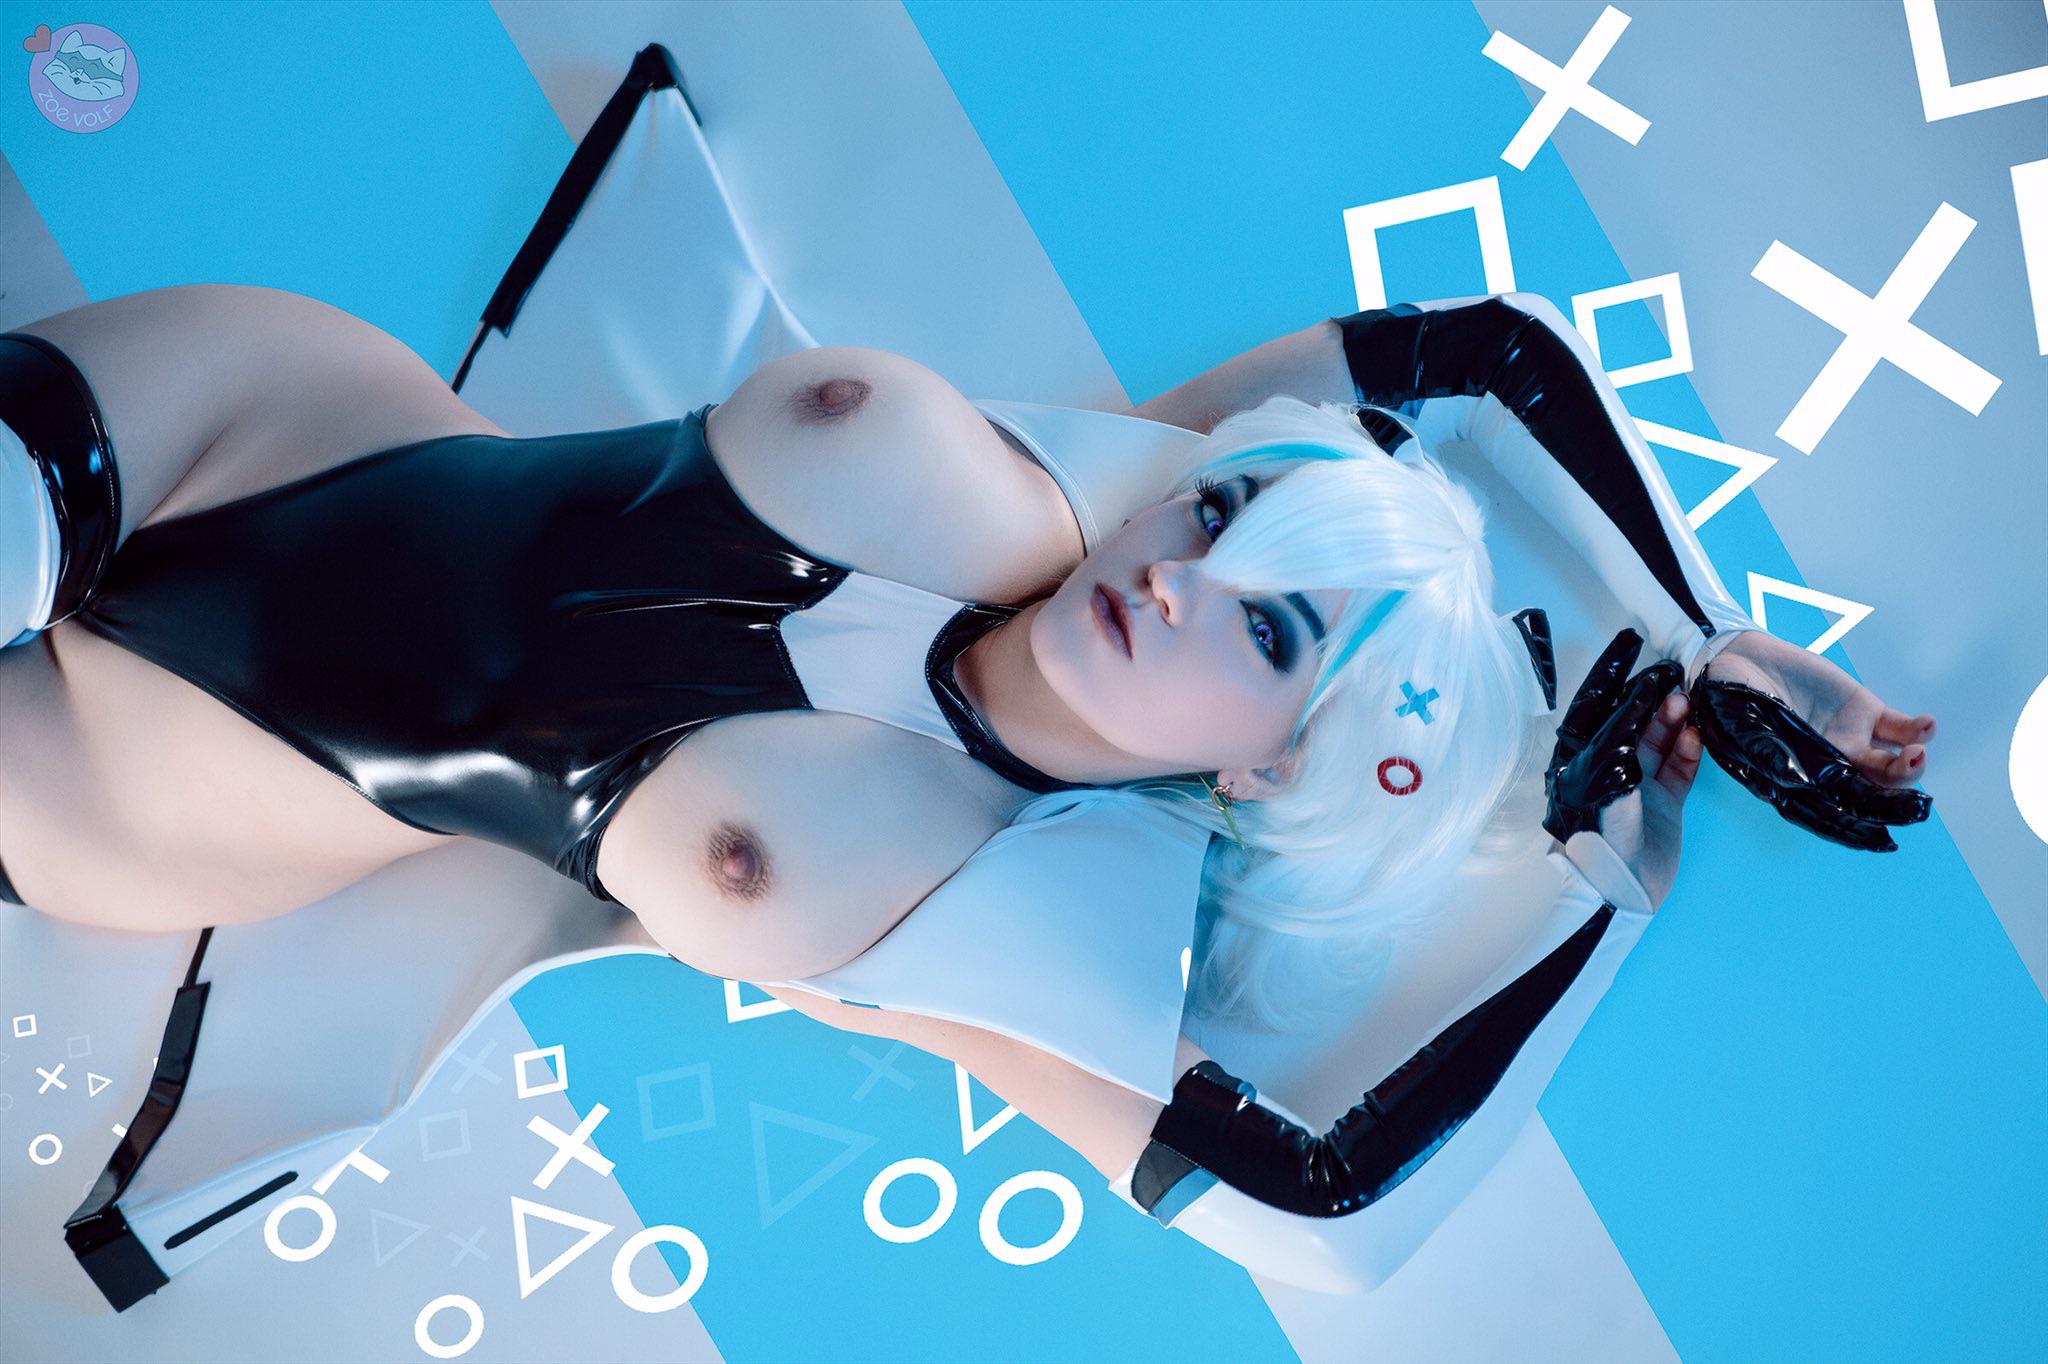 PS5-chan By Zoe Volf - Cosplay Boobies.